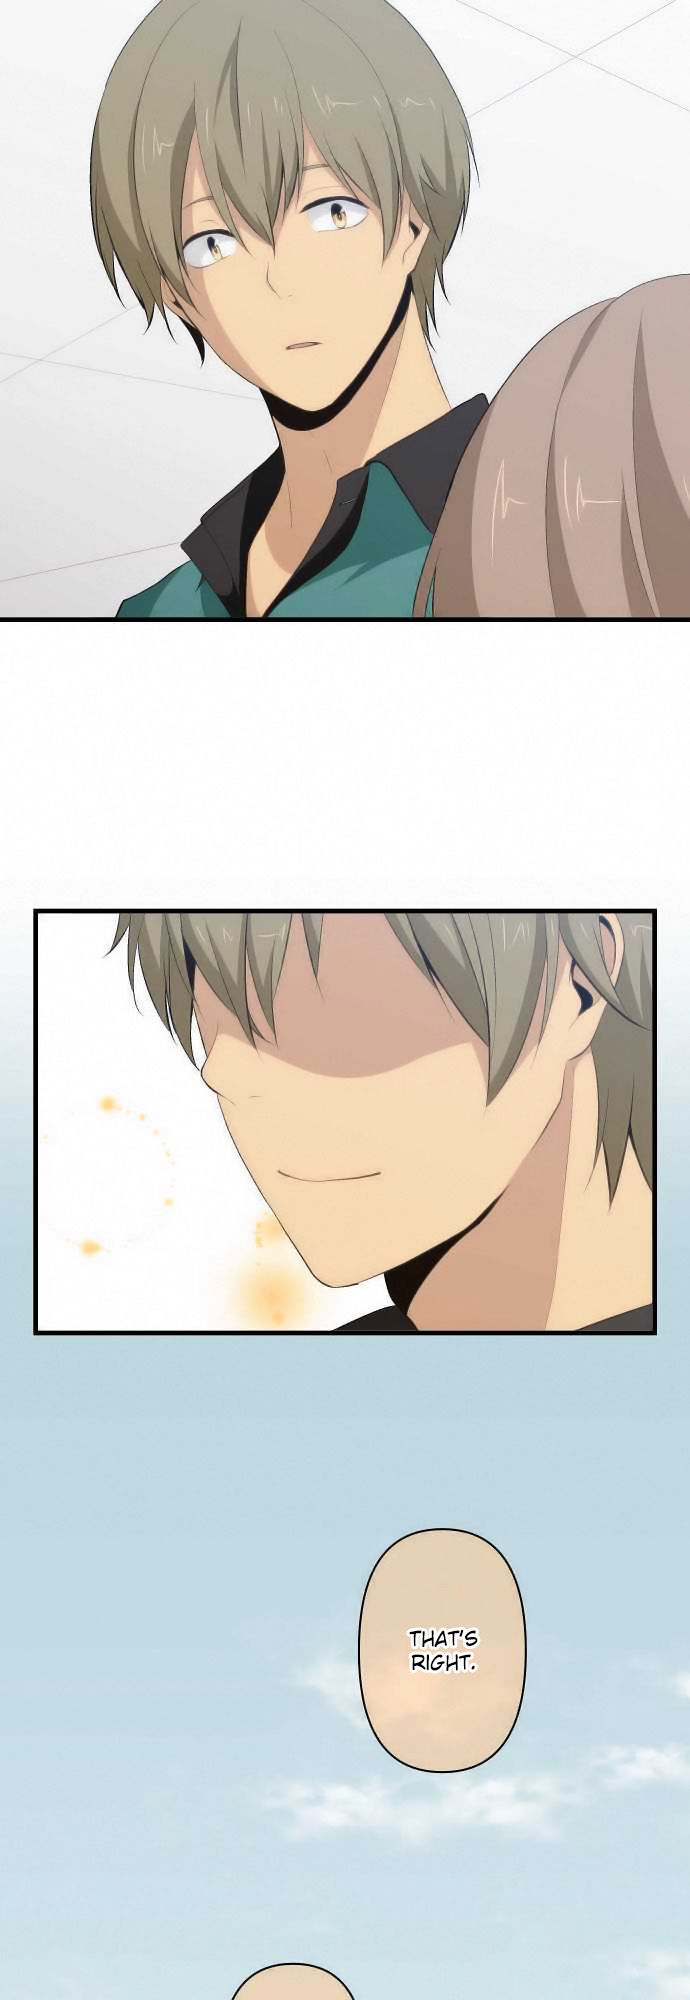 ReLIFE 79